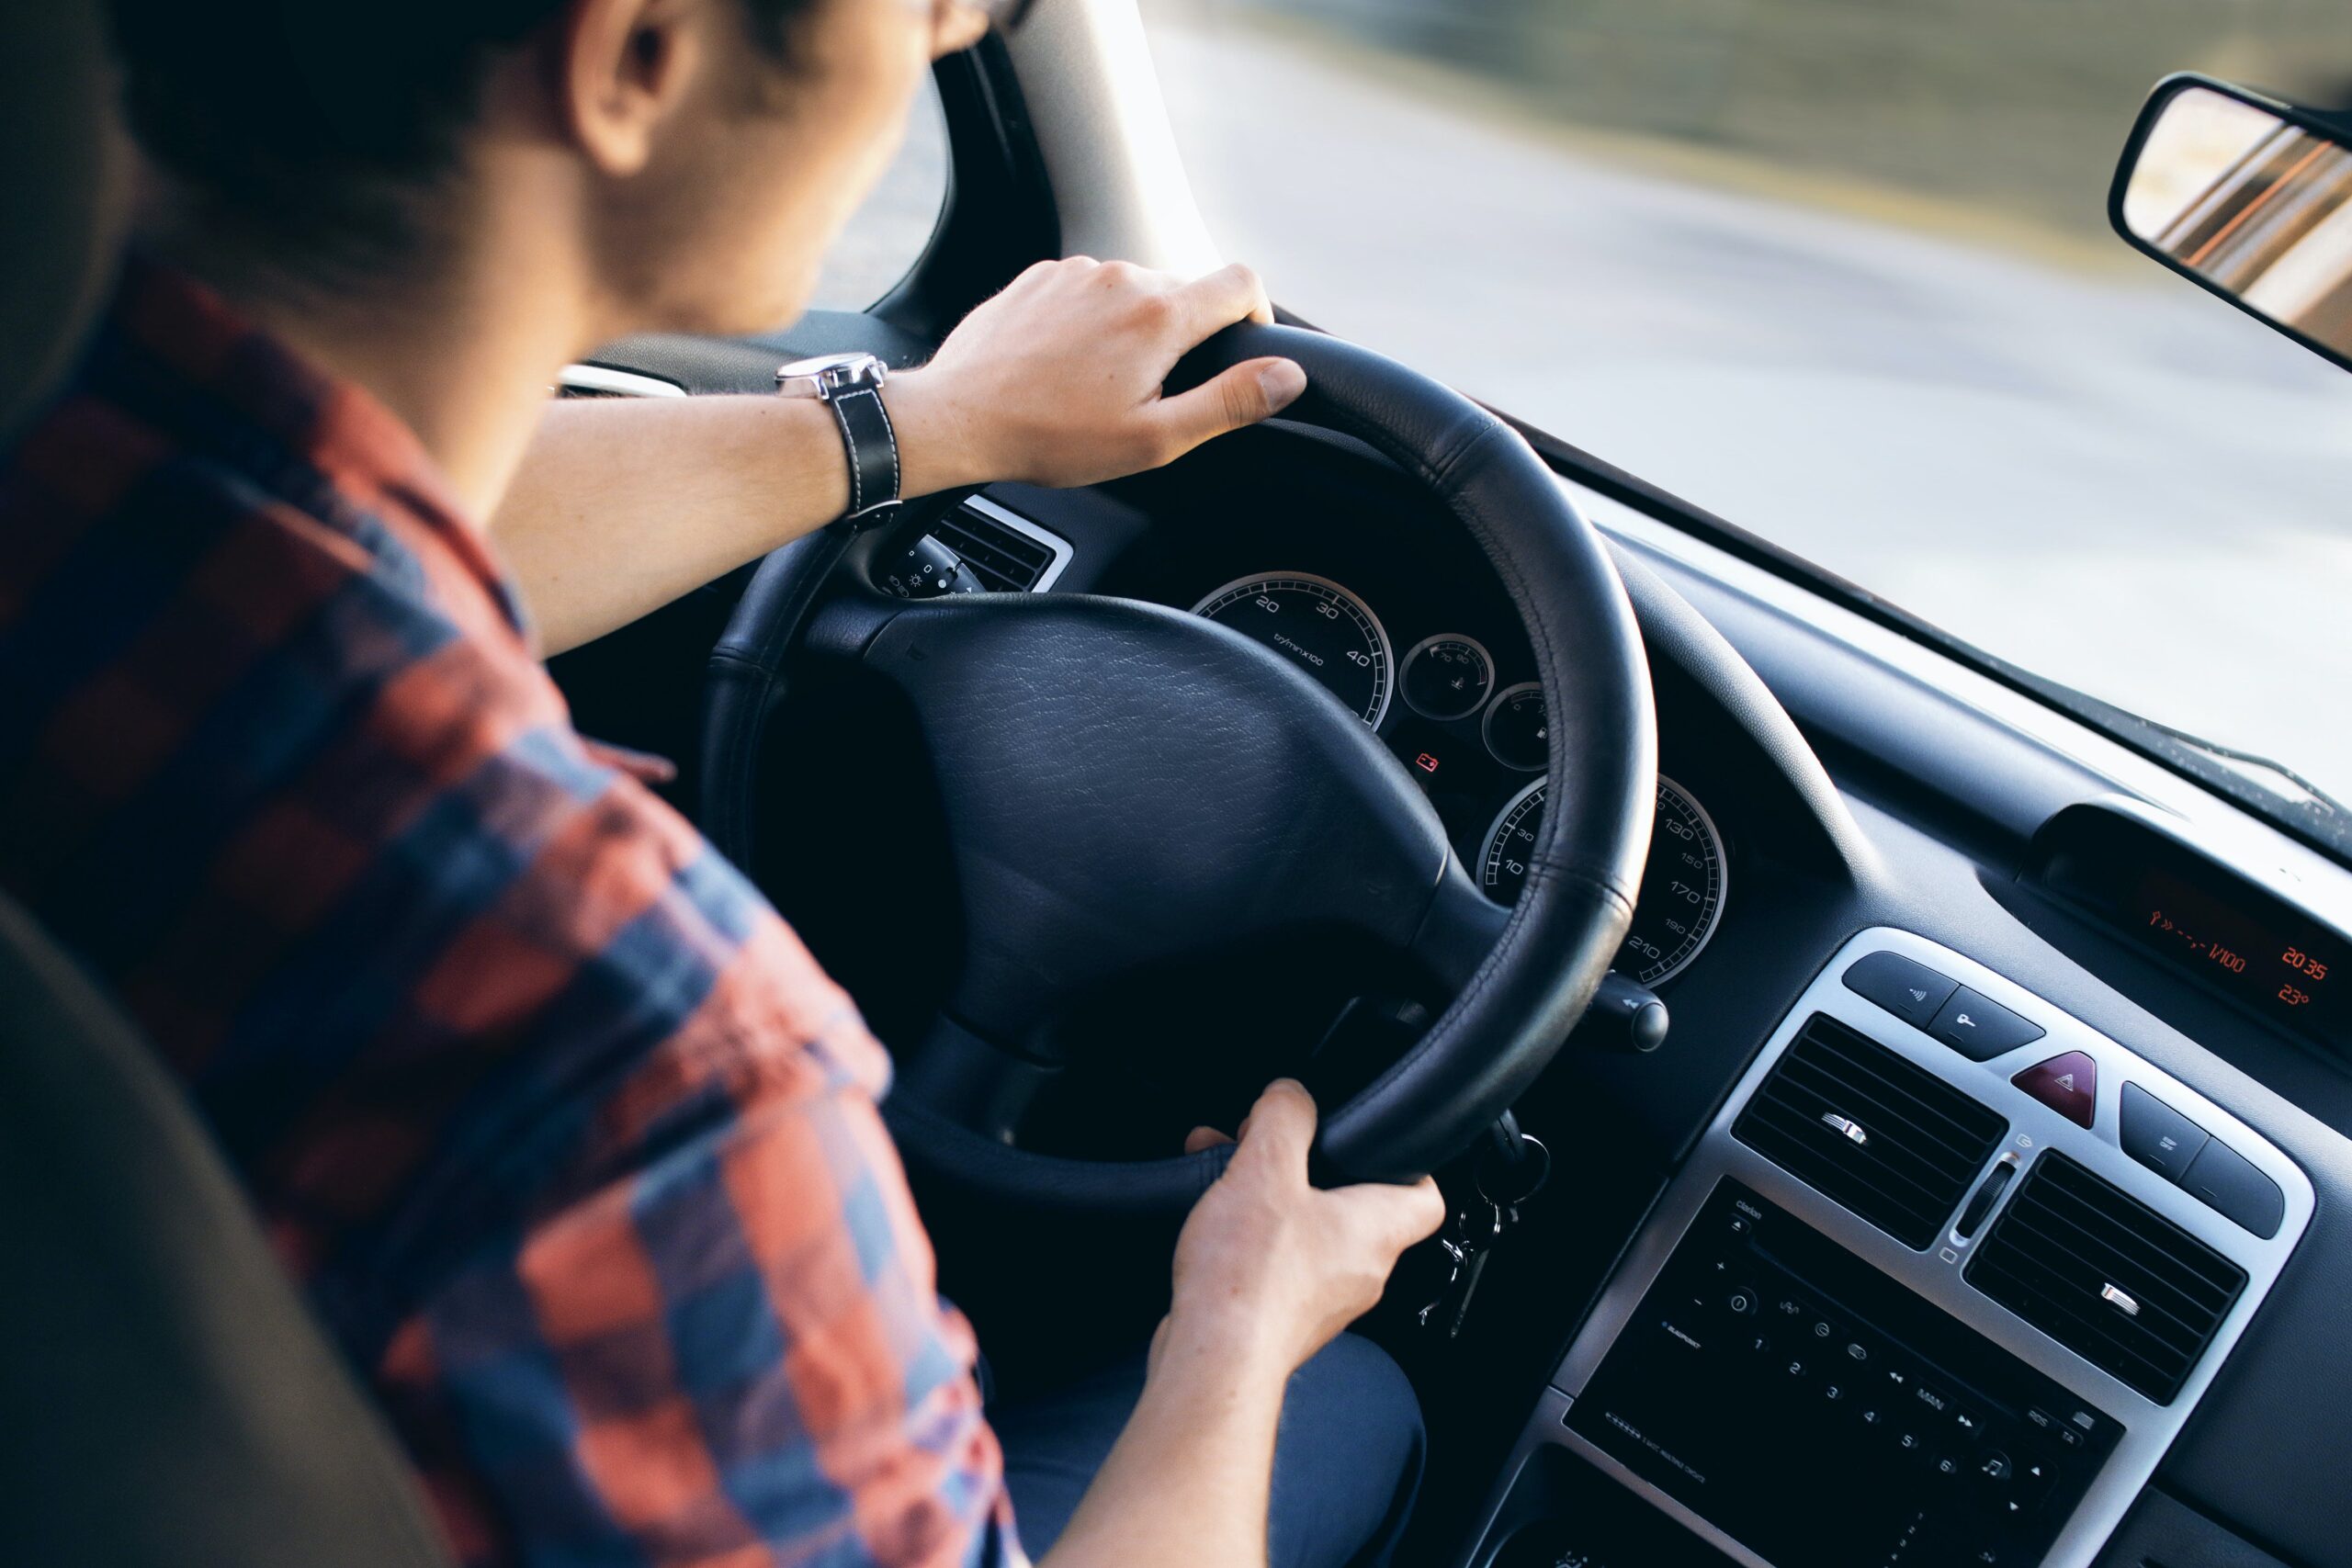 IRS Releases Standard Mileage Rates for 2024